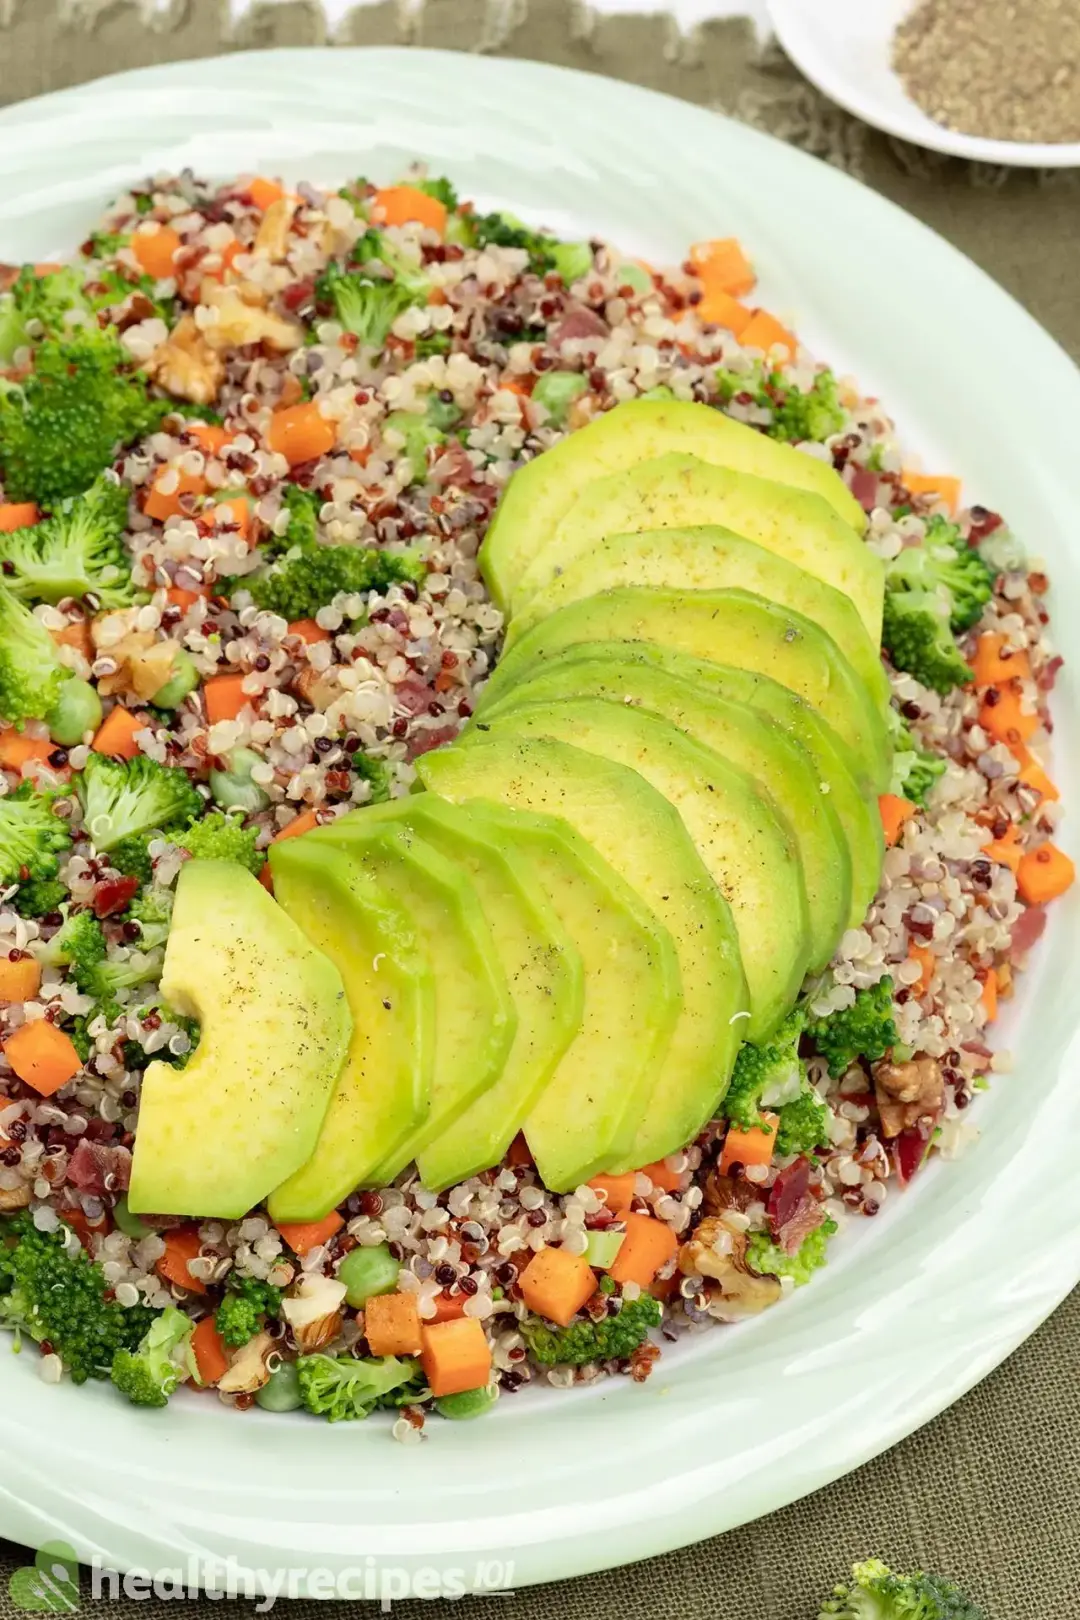 A plate of colorful quinoa salad, topped with a nice row of avocado slices